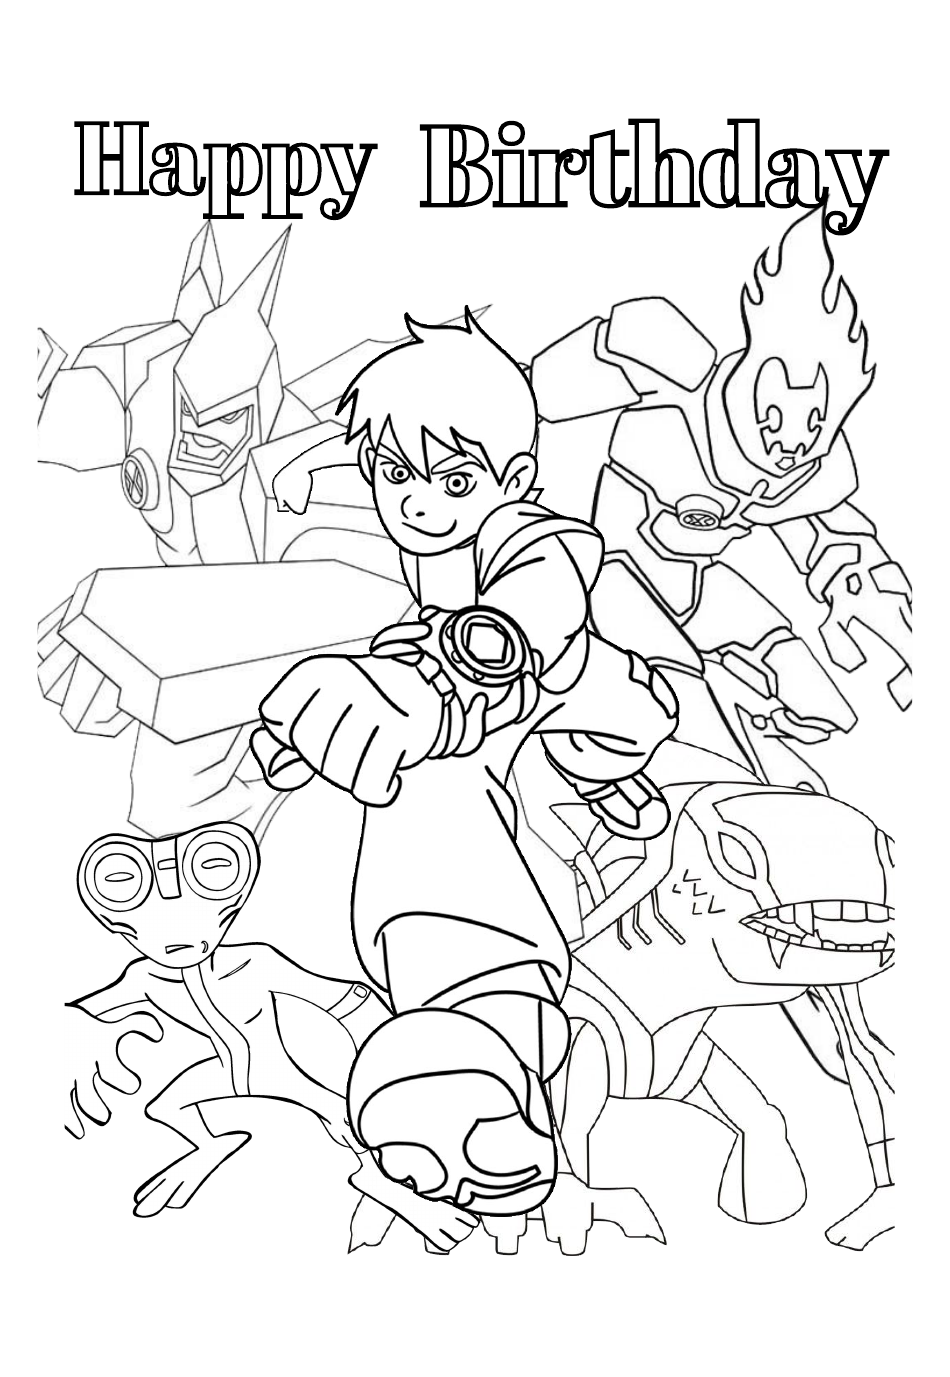 Birthday Coloring Page with Ben 10